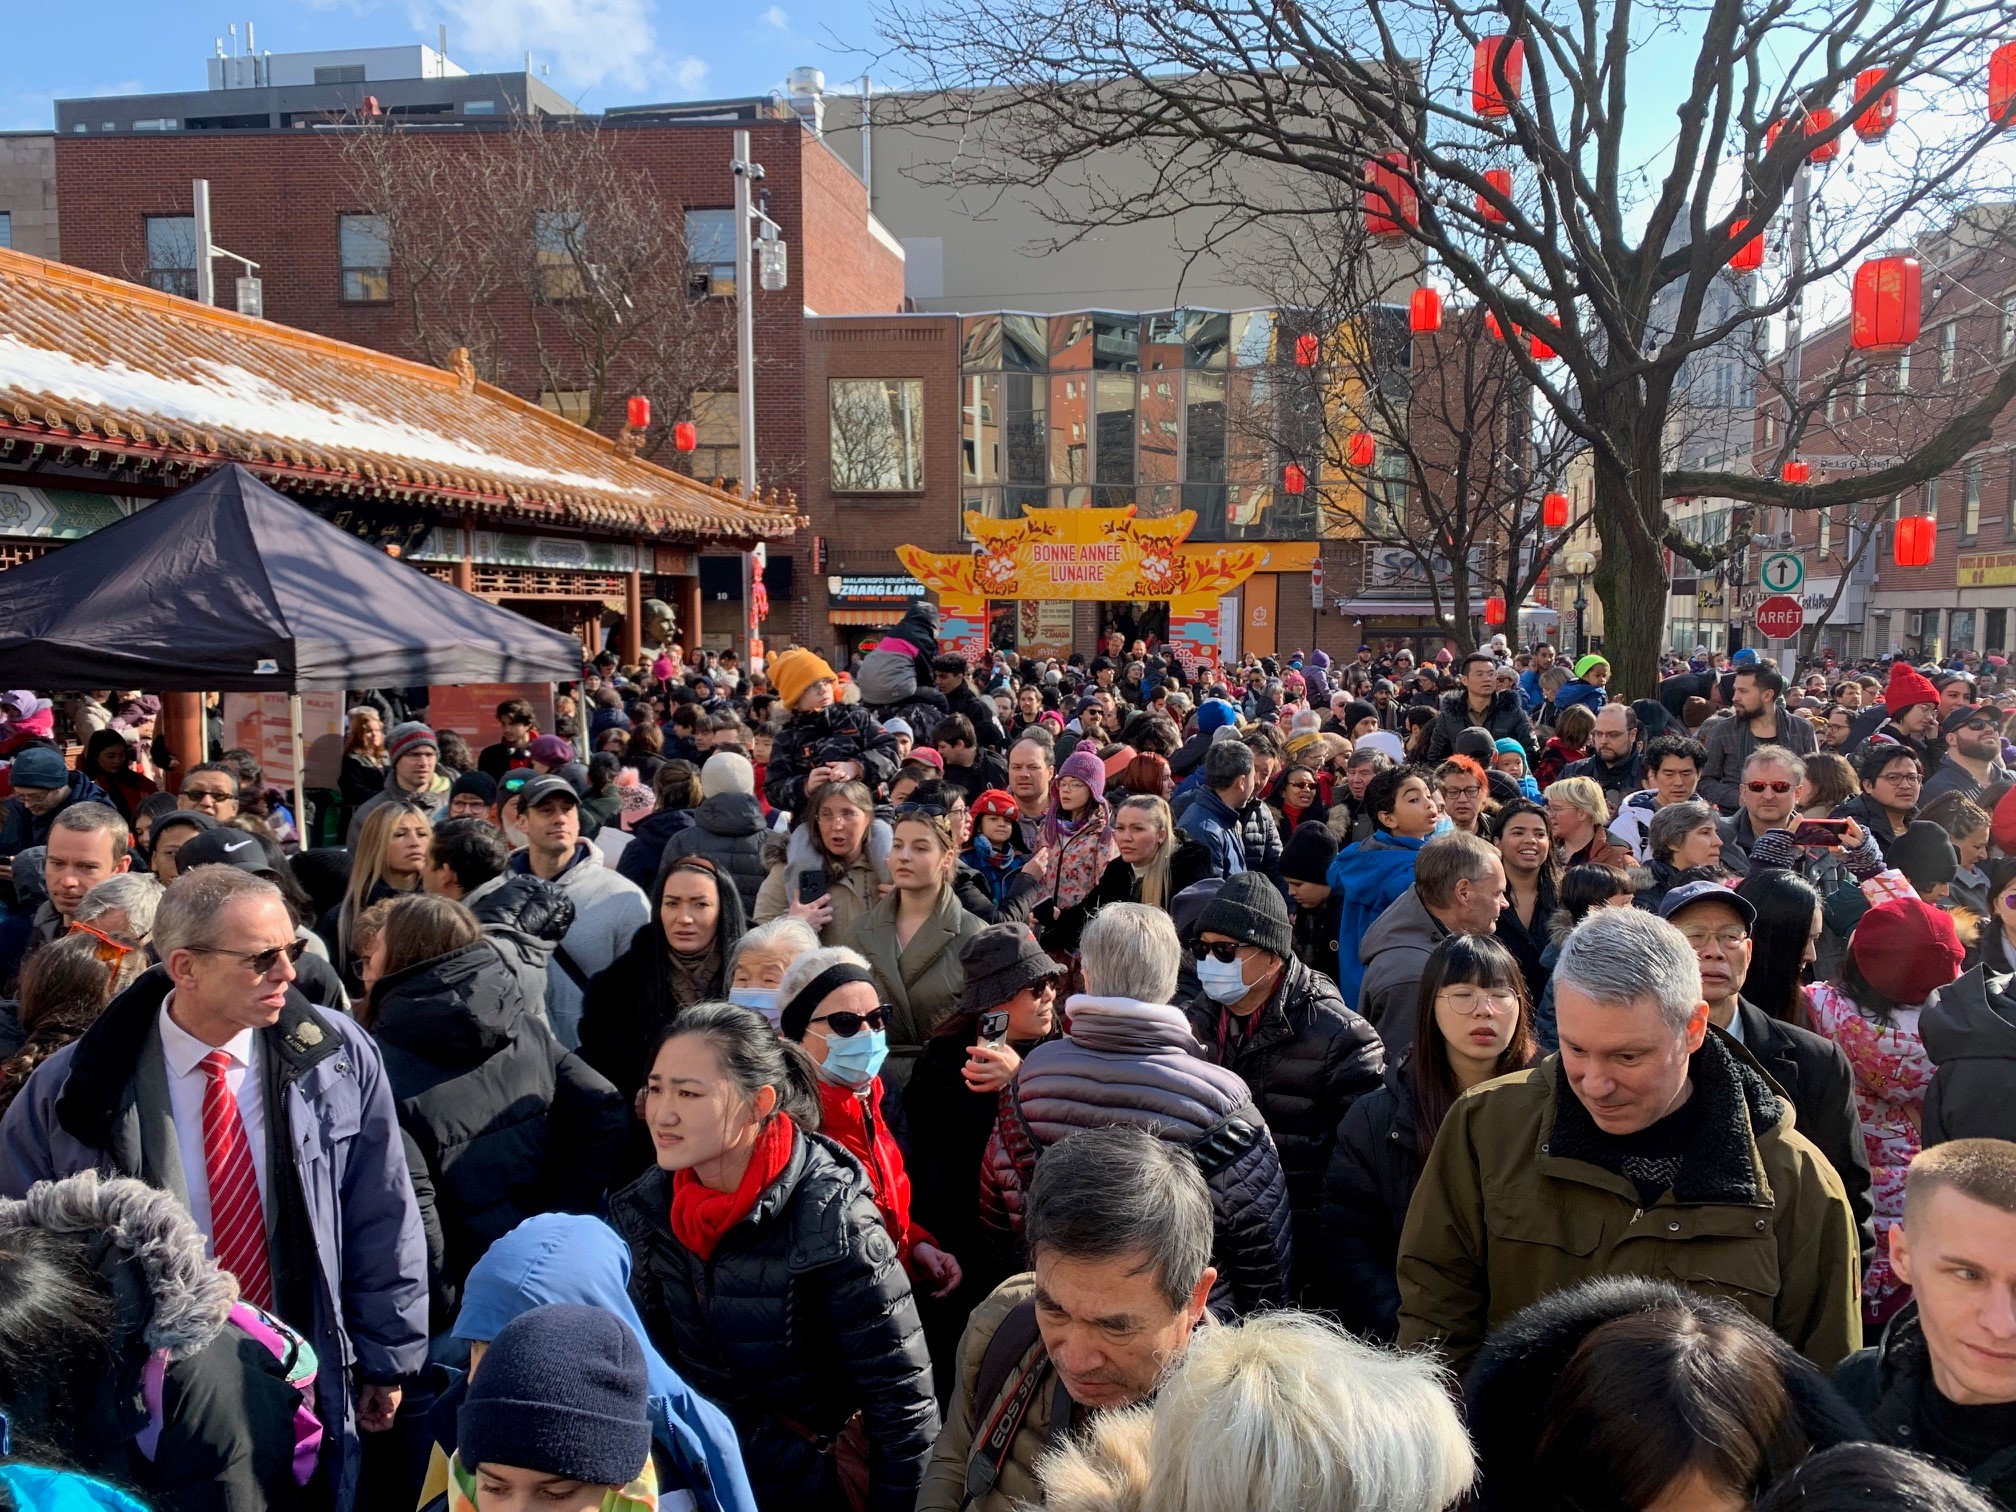 Lunar new year kicks off in Montreal’s Chinatown